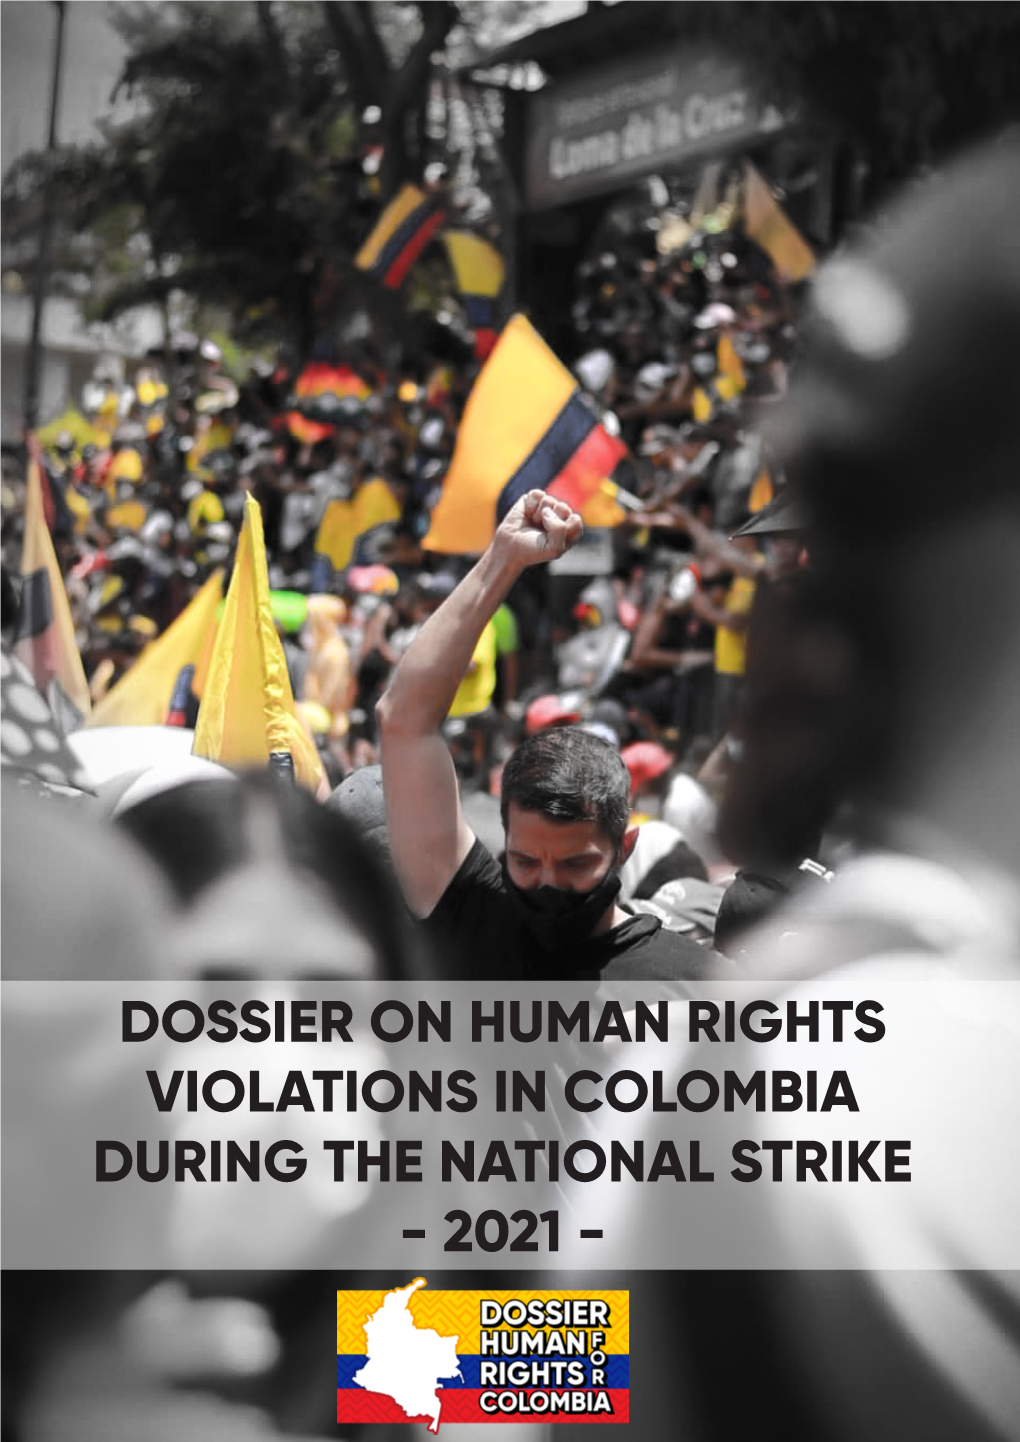 Dossier on Human Rights Violations